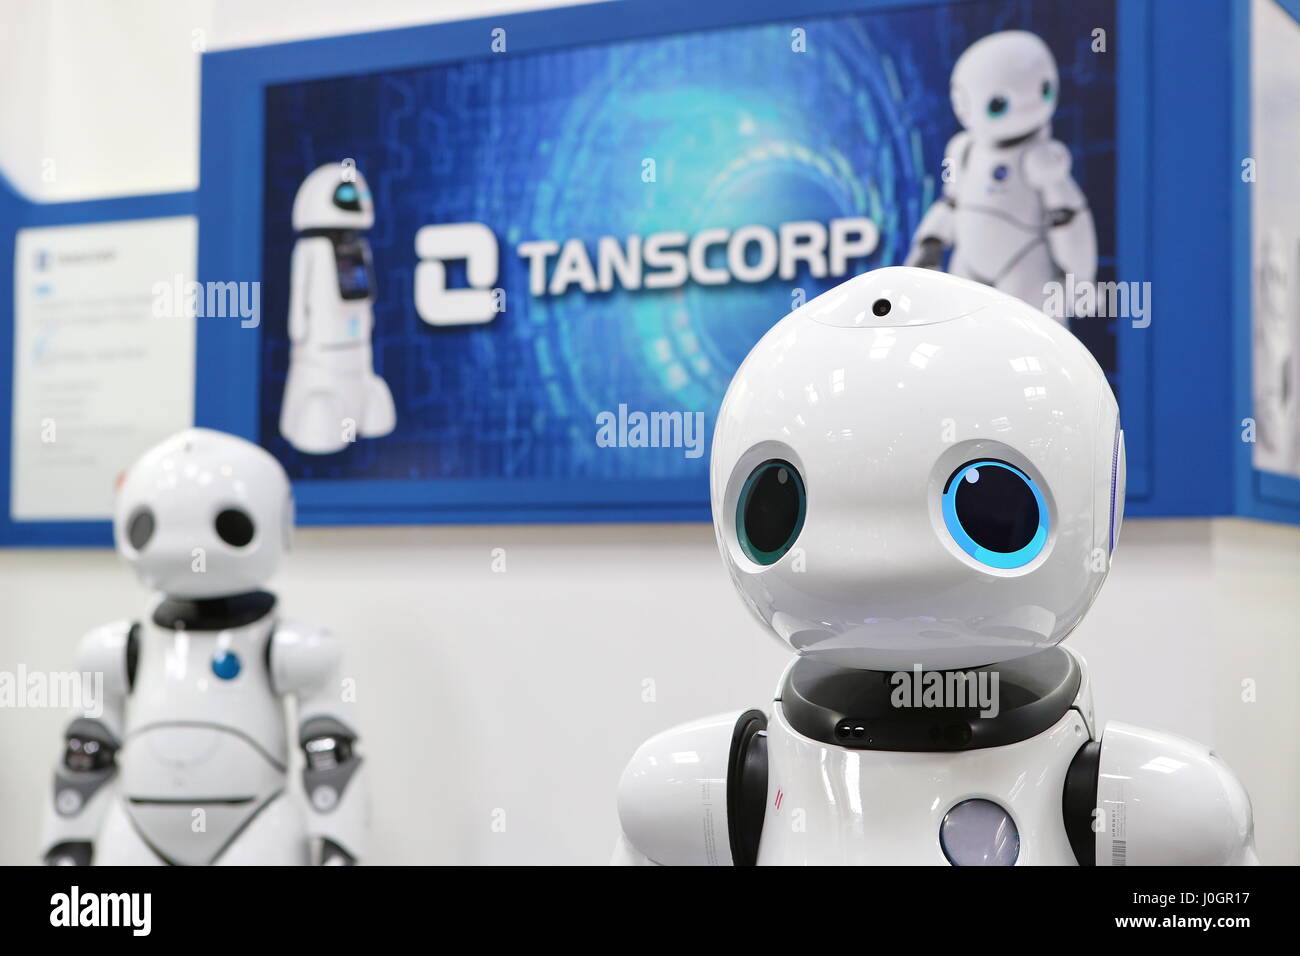 Hanover, Germany. 21th March, 2017. Intelligent humanoid robots by 'Tanscorp' (Shenzhen Tanscorp Technology Co., Ltd, China), here model 'UU', usable in services like tour/shopping guide, entertainment. CeBIT 2017, ICT trade fair, lead theme 'd!conomy - no limits'. Photocredit: Christian Lademann Stock Photo